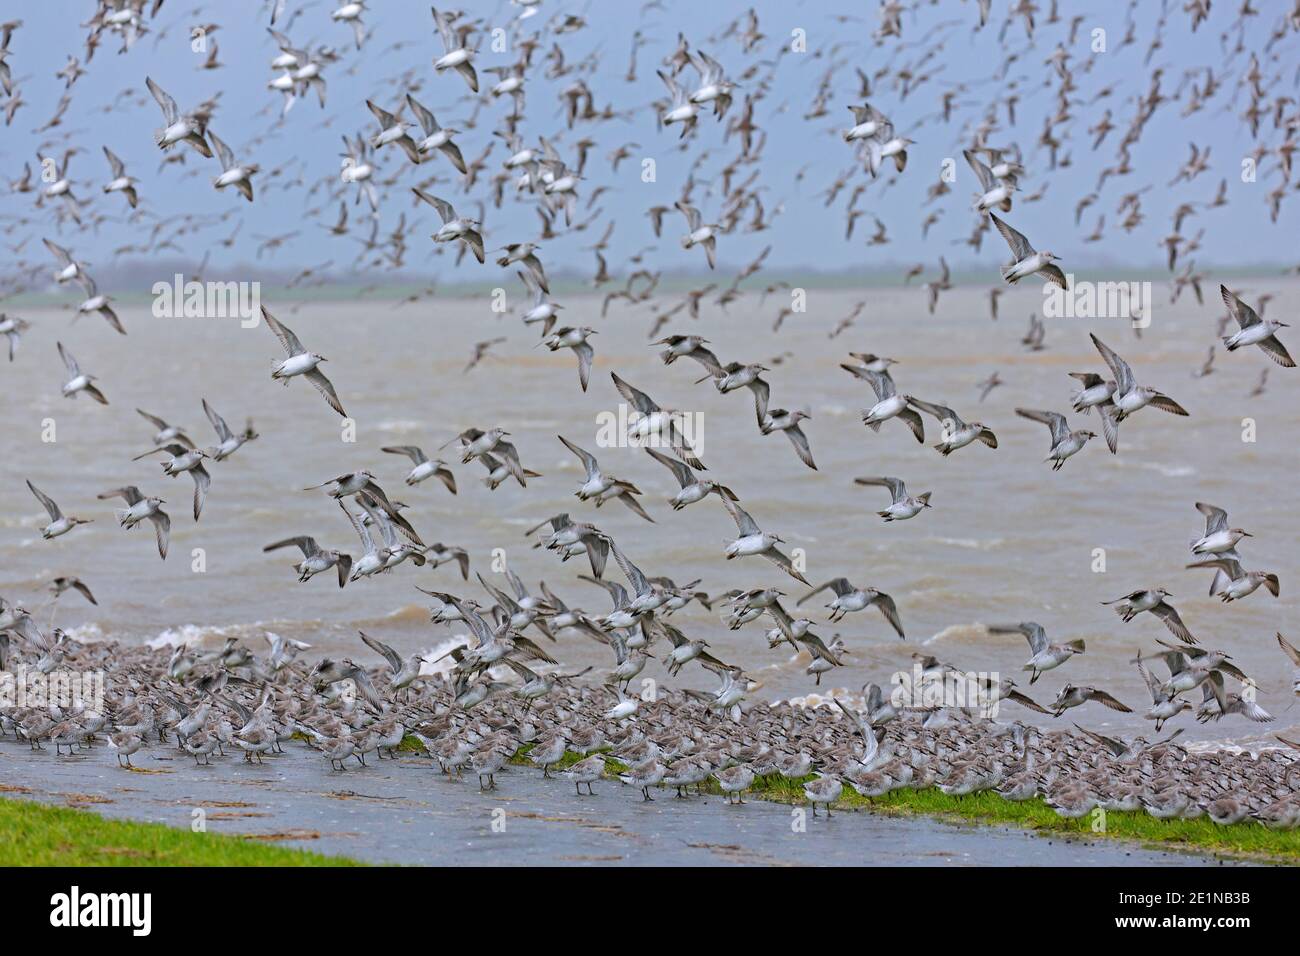 Red knots (Calidris canutus) huge red knot flock in flight in non-breeding plumage in winter, Wadden Sea NP, Schleswig-Holstein, Germany Stock Photo